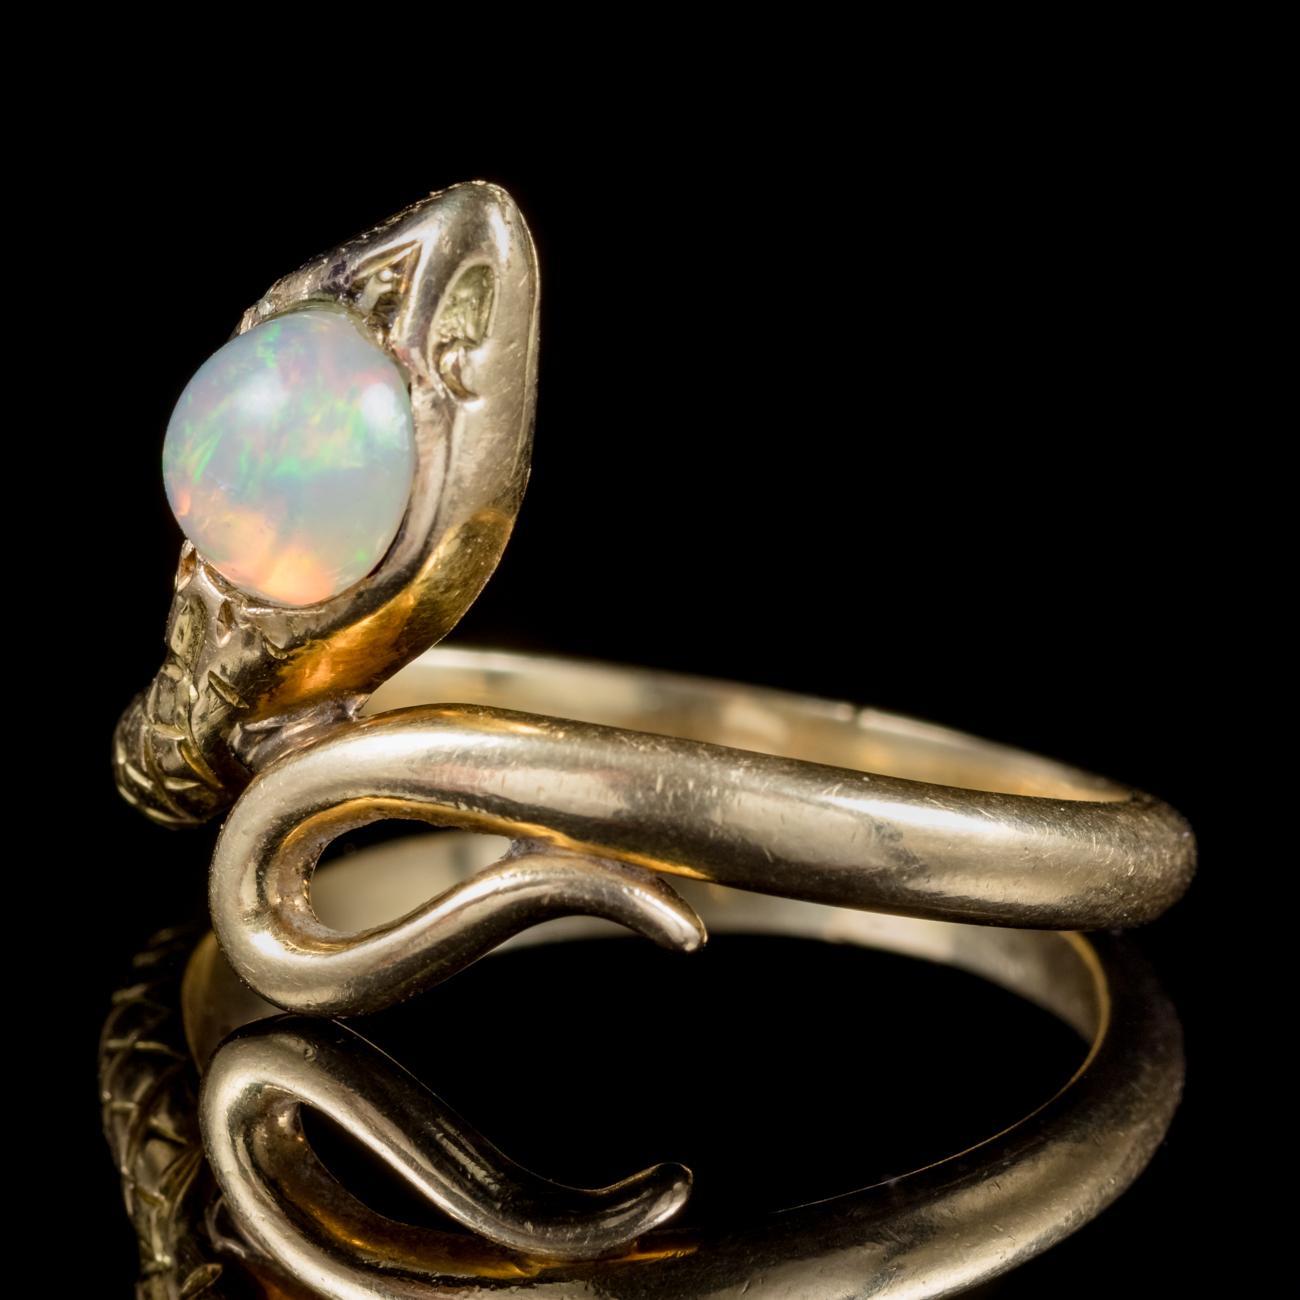 A wonderful antique Victorian 18ct Yellow Gold snake ring crowned with a beautiful 0.75ct natural Opal. Serpent jewellery was popular in Victorian times and represented love, loyalty and friendship. The lovely Opal is a kaleidoscope of rainbow